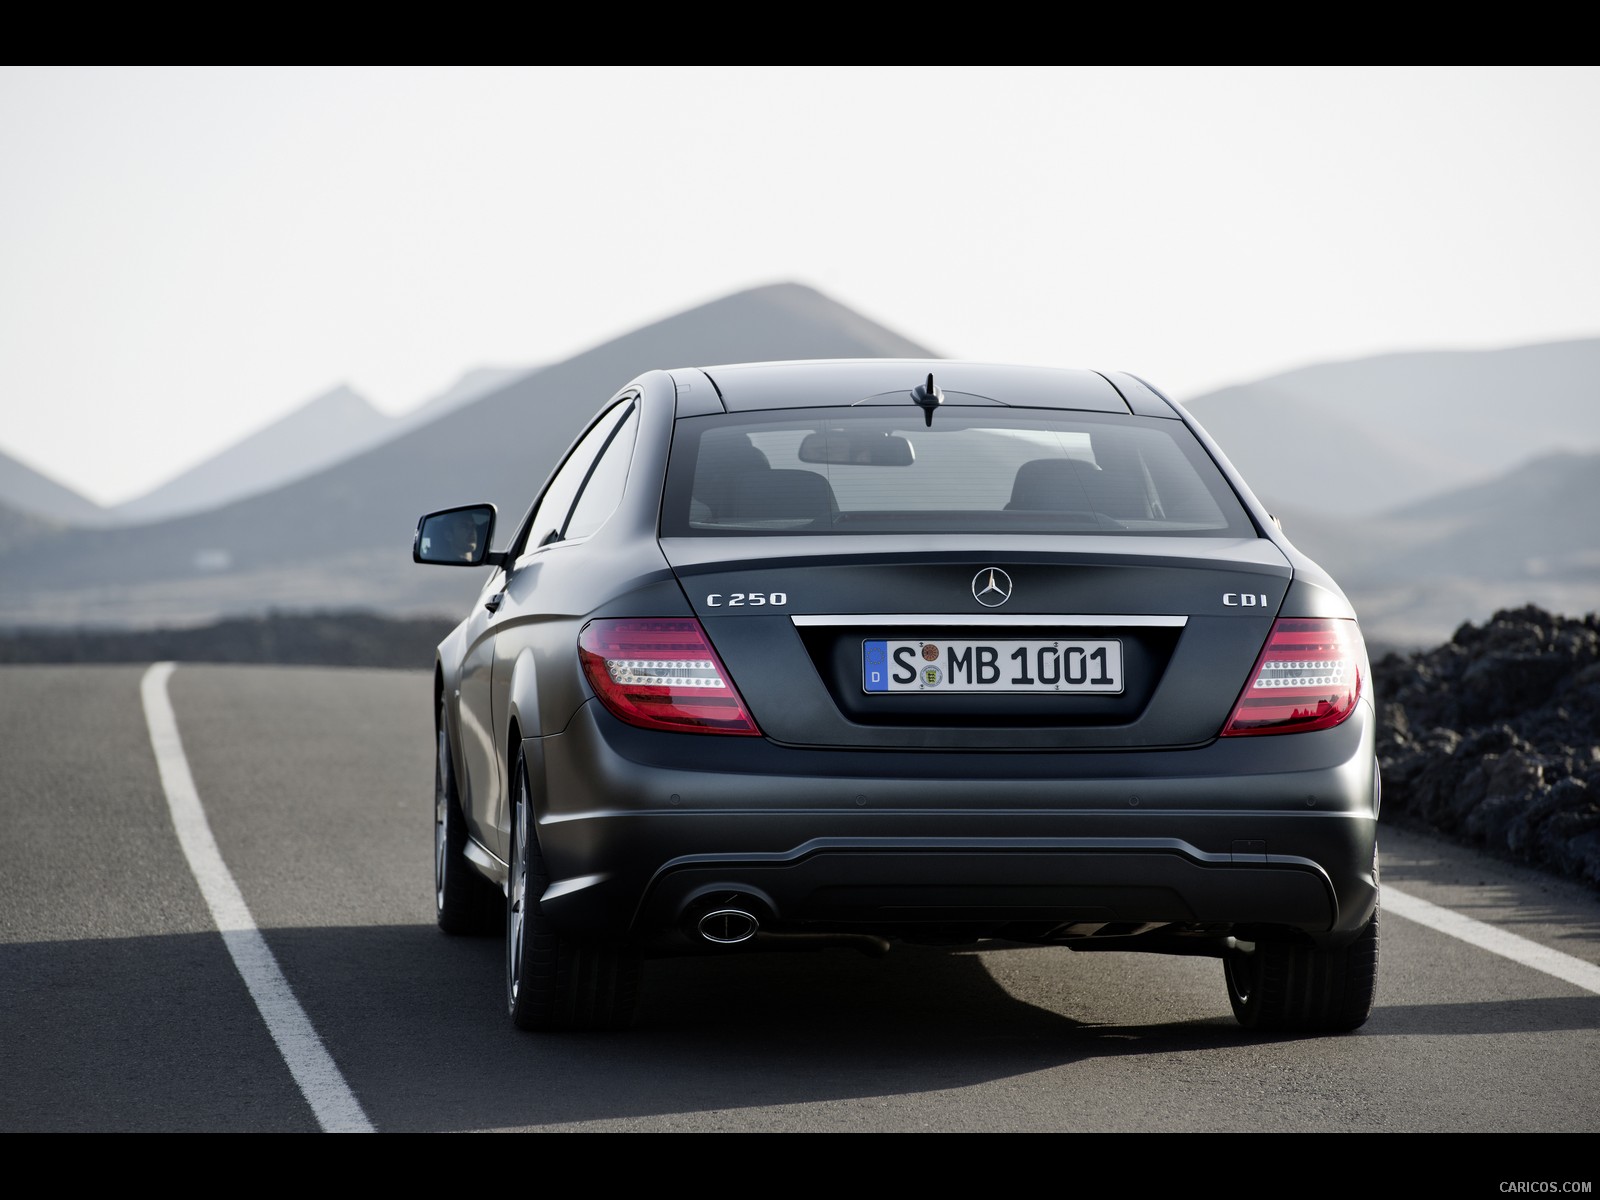 Mercedes-Benz C-Class Coupe (2012)  - Rear , #4 of 79